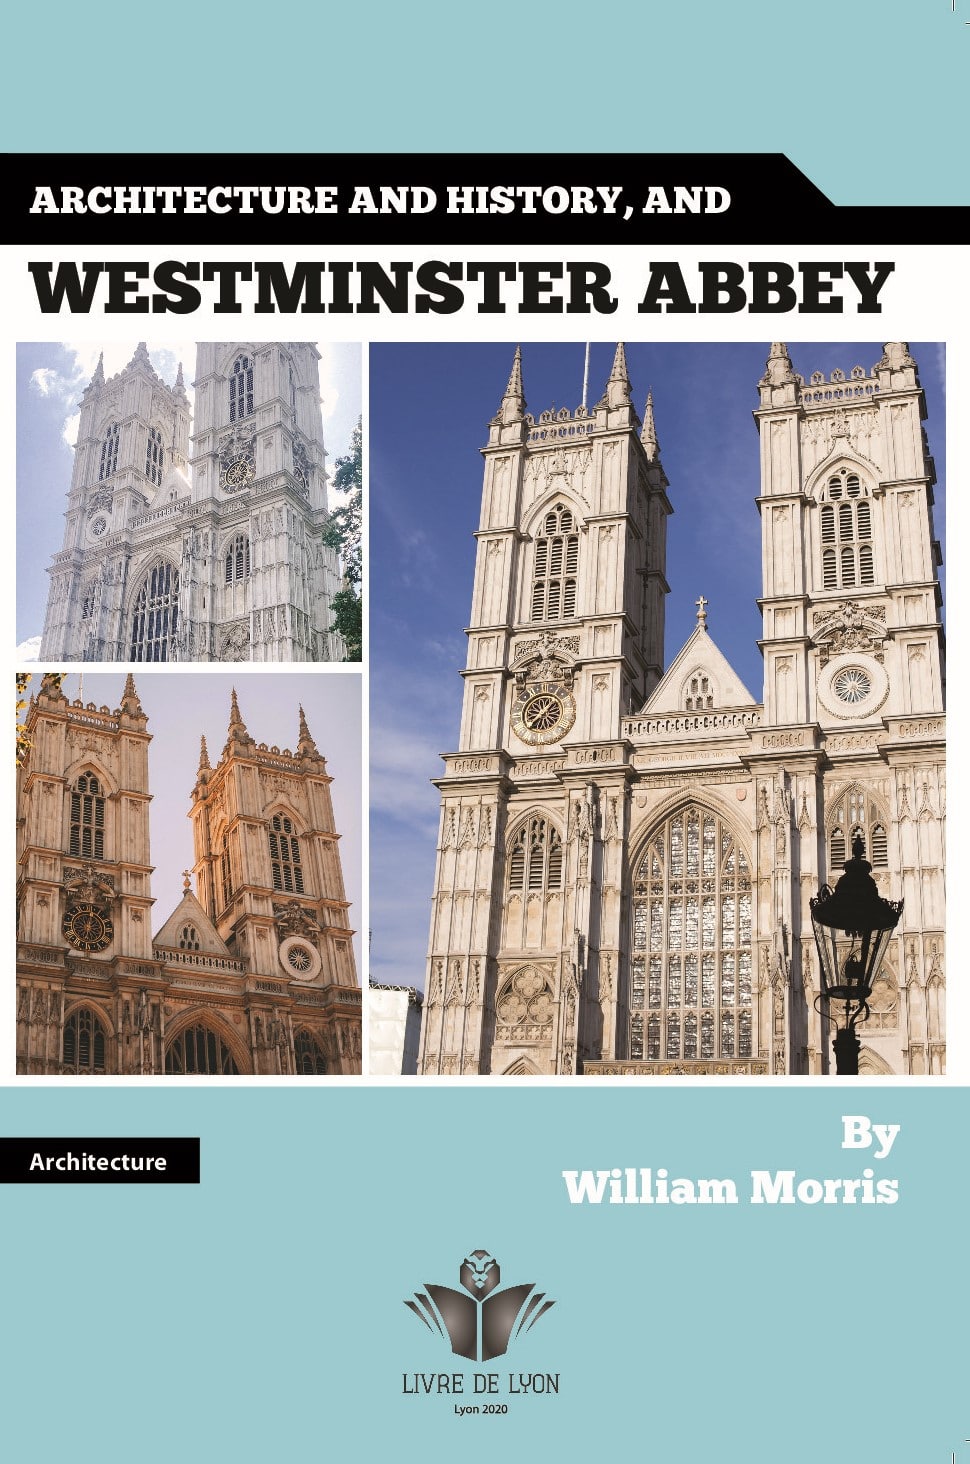 Architecture and history, and Westminster Abbey